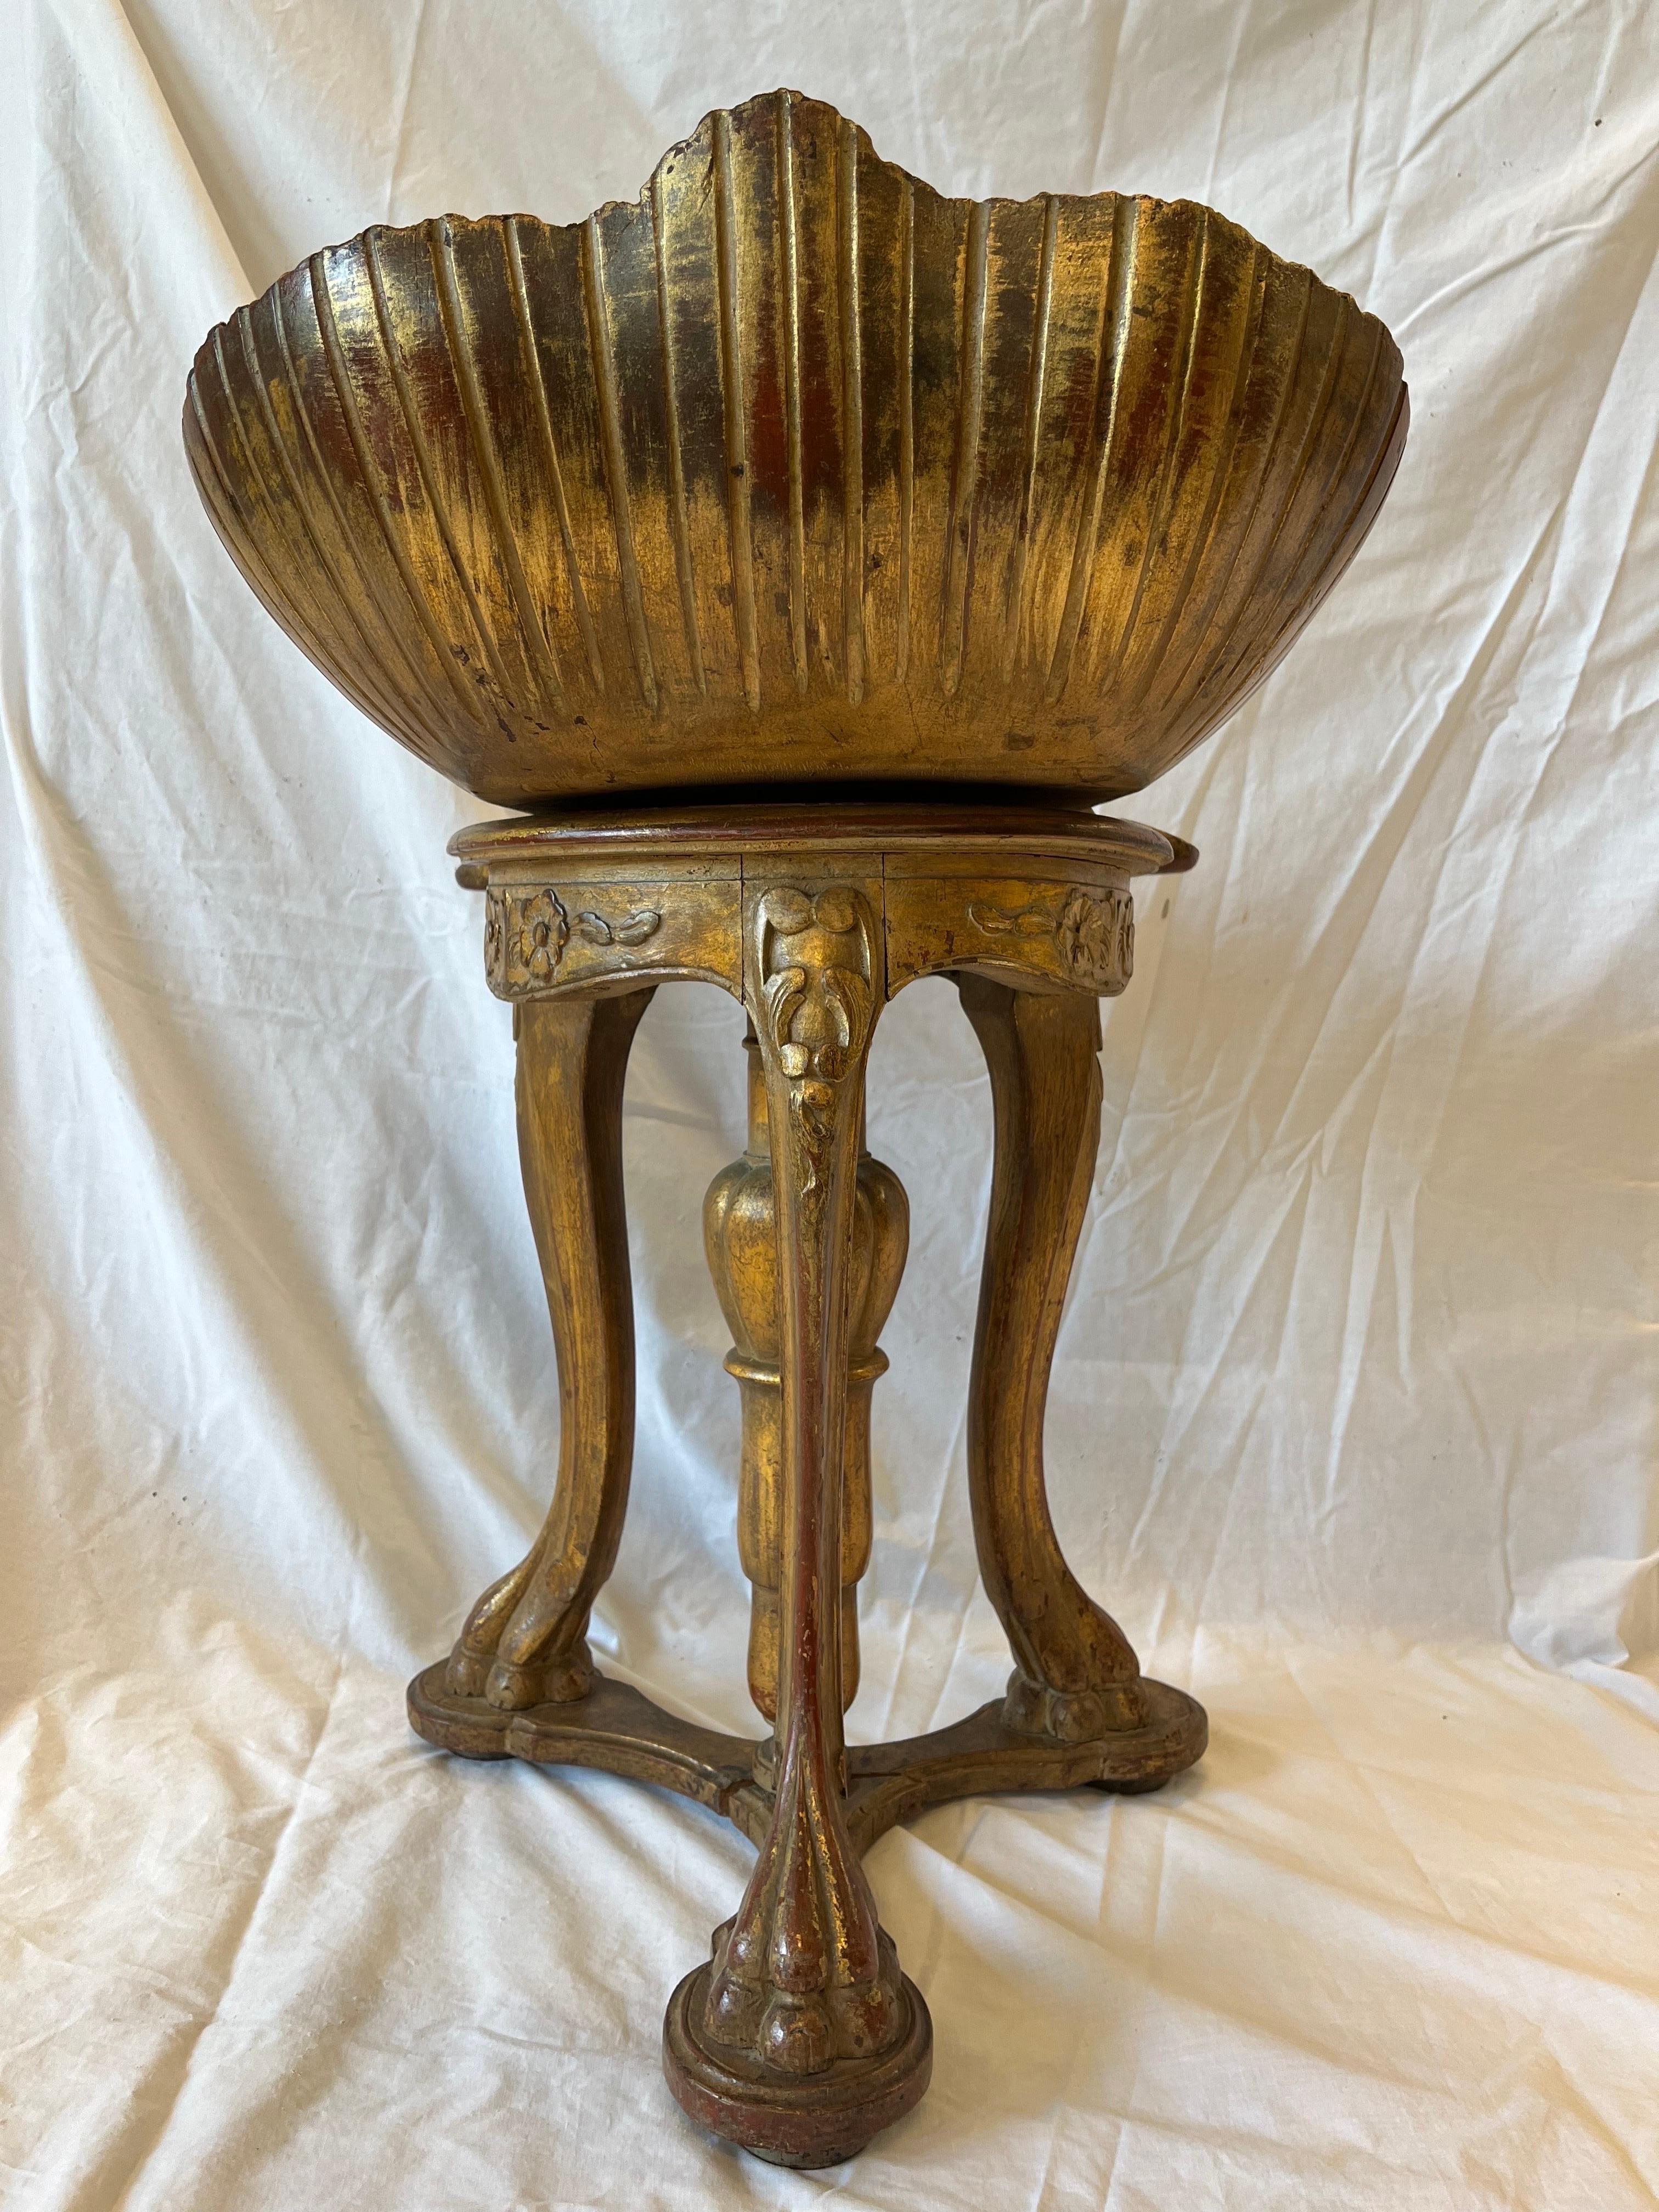 20th Century Antique Venetian Italian Grotto Piano Stool Carved Gold Gilt Shell Rocaille Seat